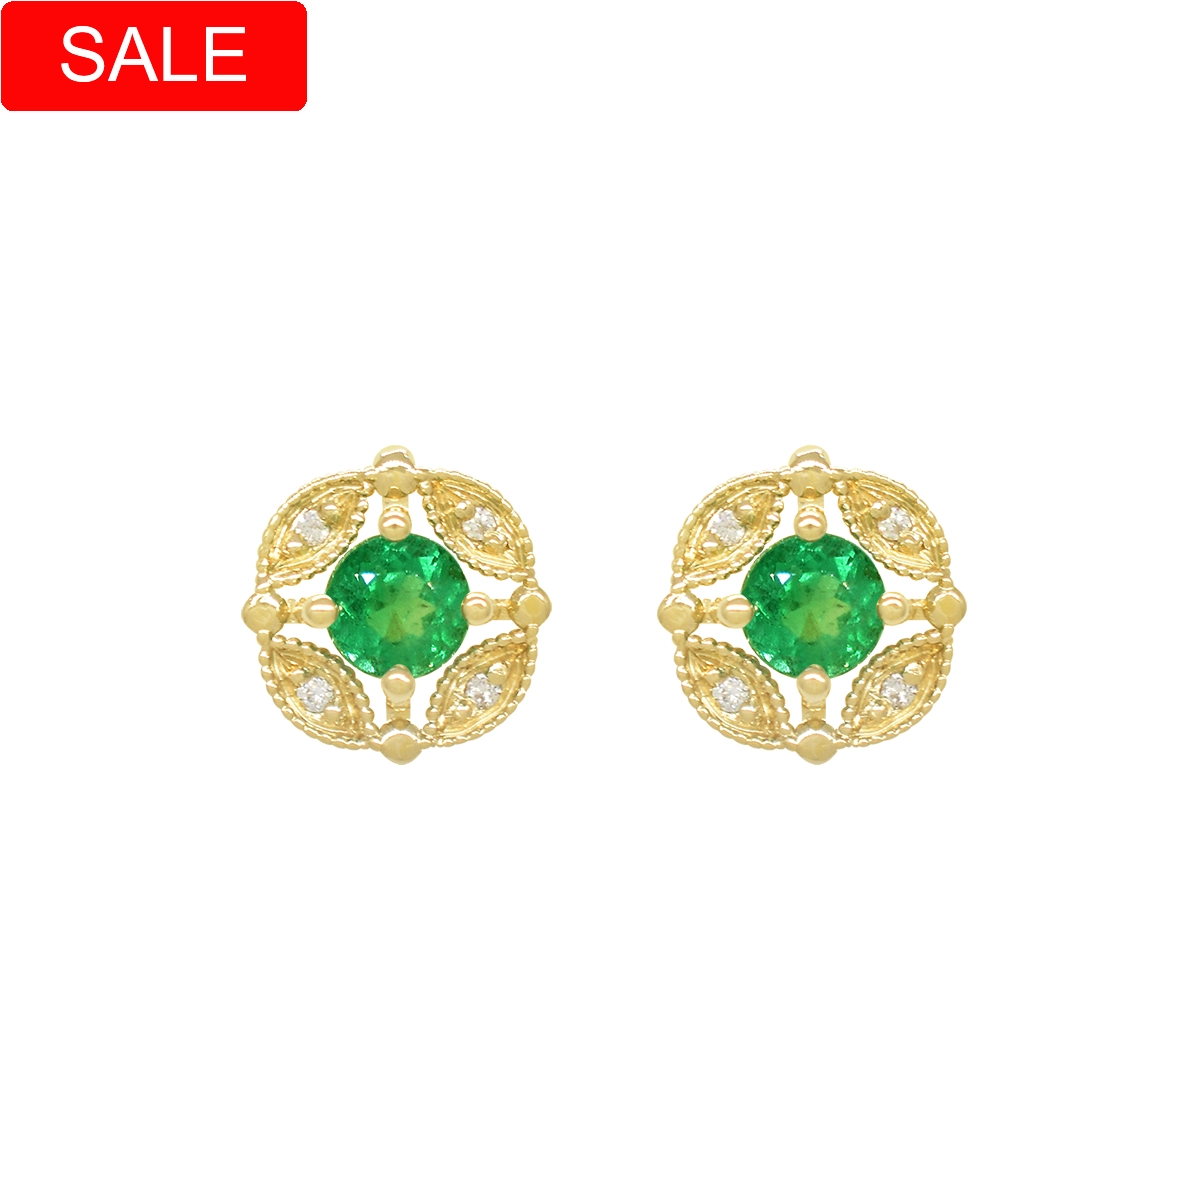 18K gold emerald and diamond stud earrings with 0.50 carats total weight in 2 round cut real natural emeralds and 0.04 carats total weight in 8 round cut genuine diamonds